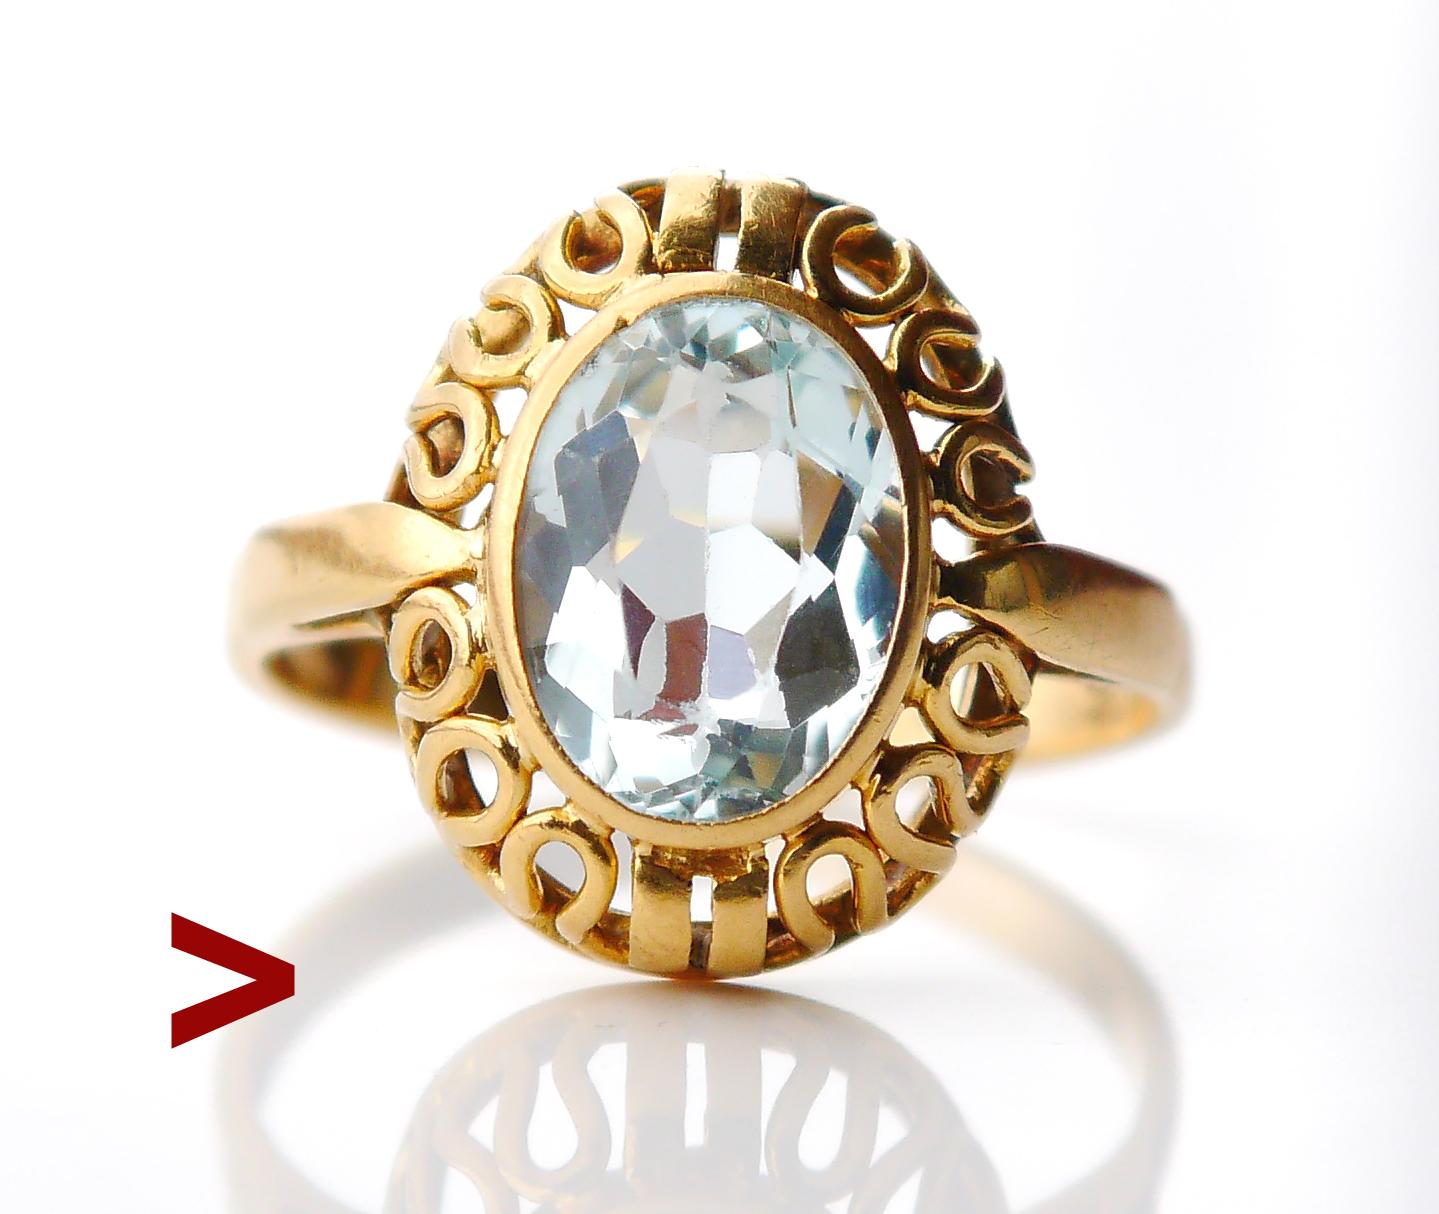 German ring with open-work crown and band in solid 18K Gold featuring natural transparent Aquamarine stone 10 mm x 8 mm x 4.6 mm / ca. 3 ct ct, color light Blue with tint of Green.

The Crown is 16 mm x 12 x 6 mm deep. Hallmarked 750 and logo of